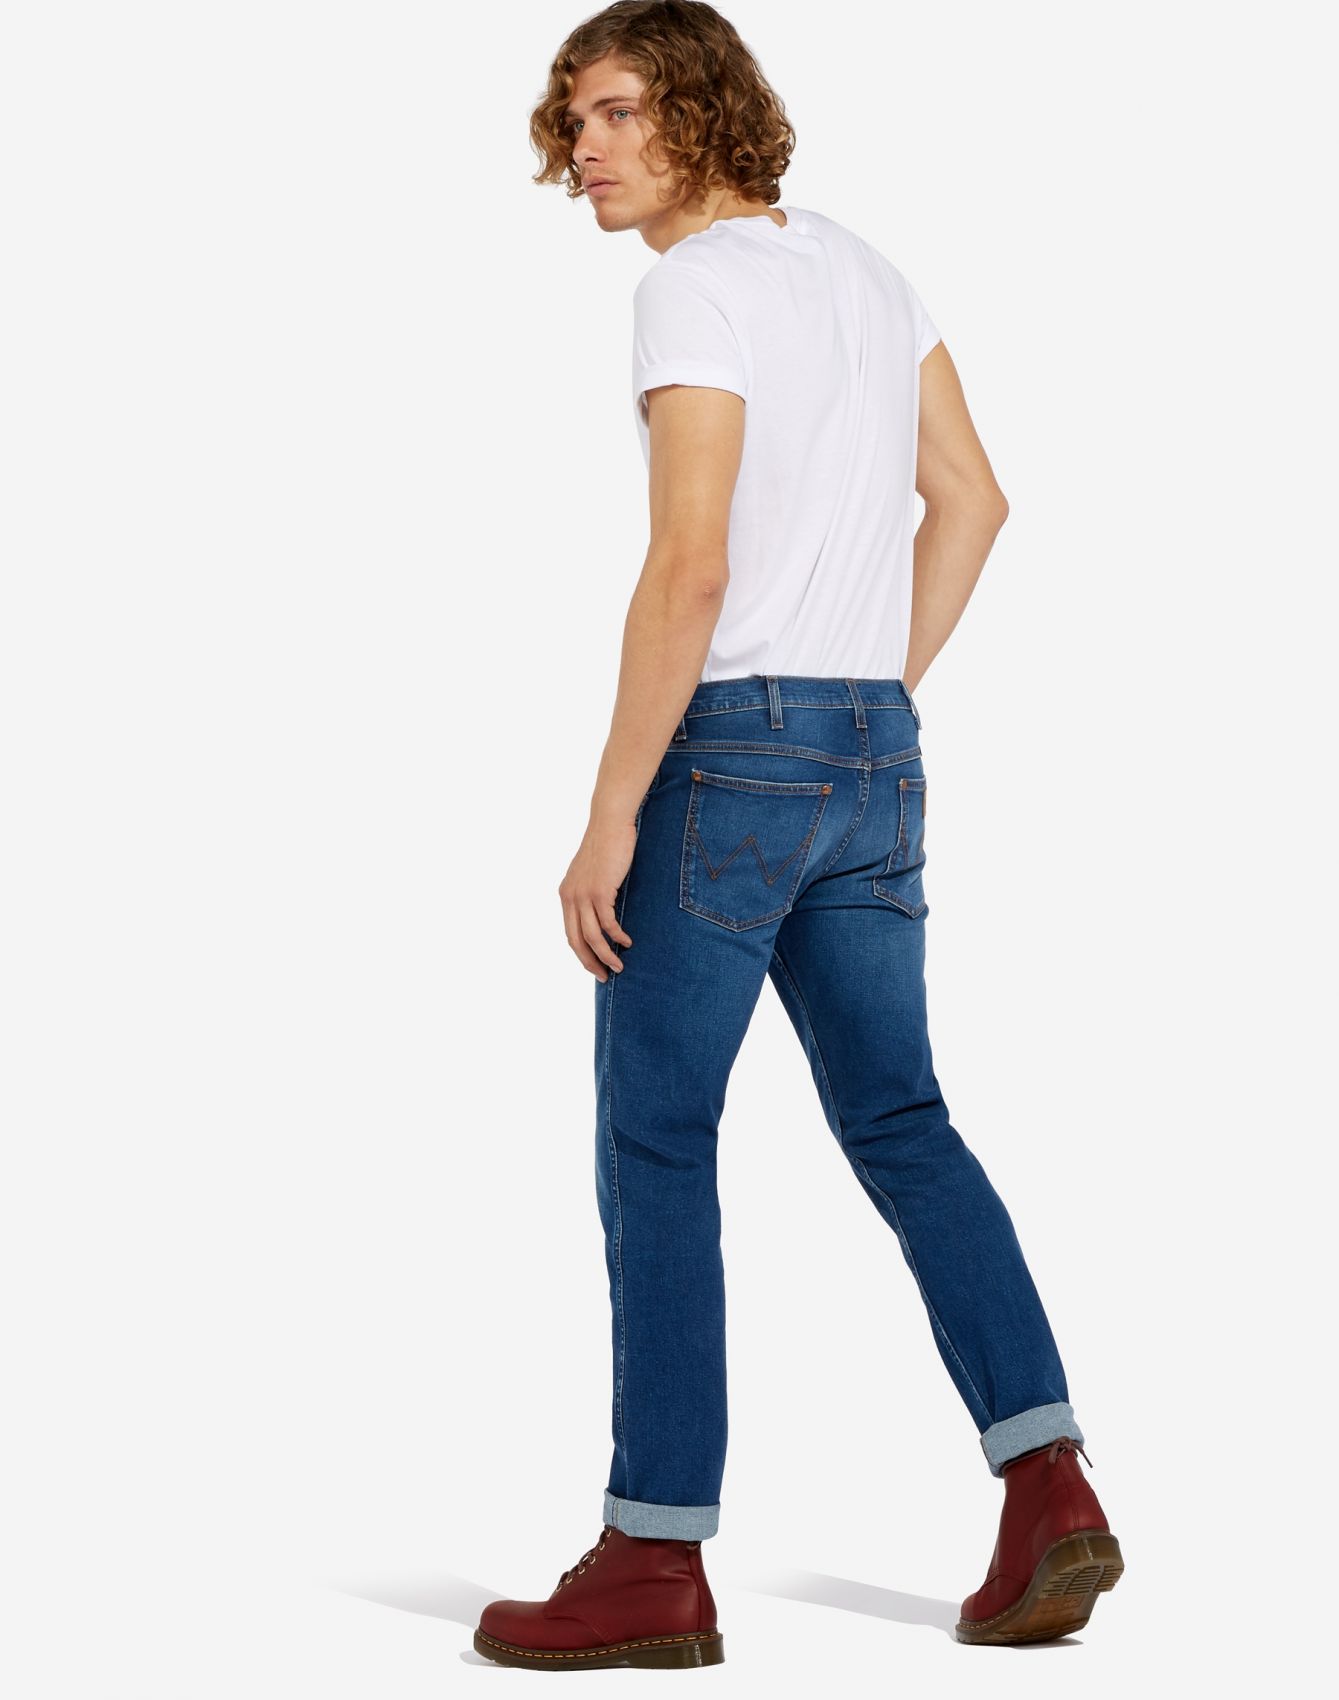 https://www.collectionabbigliamento.it/open2b/var/products/23/37/0-052ee298-1700-Jeans-wrangler-slim-fit-high-waisted-denim-stretch.jpg